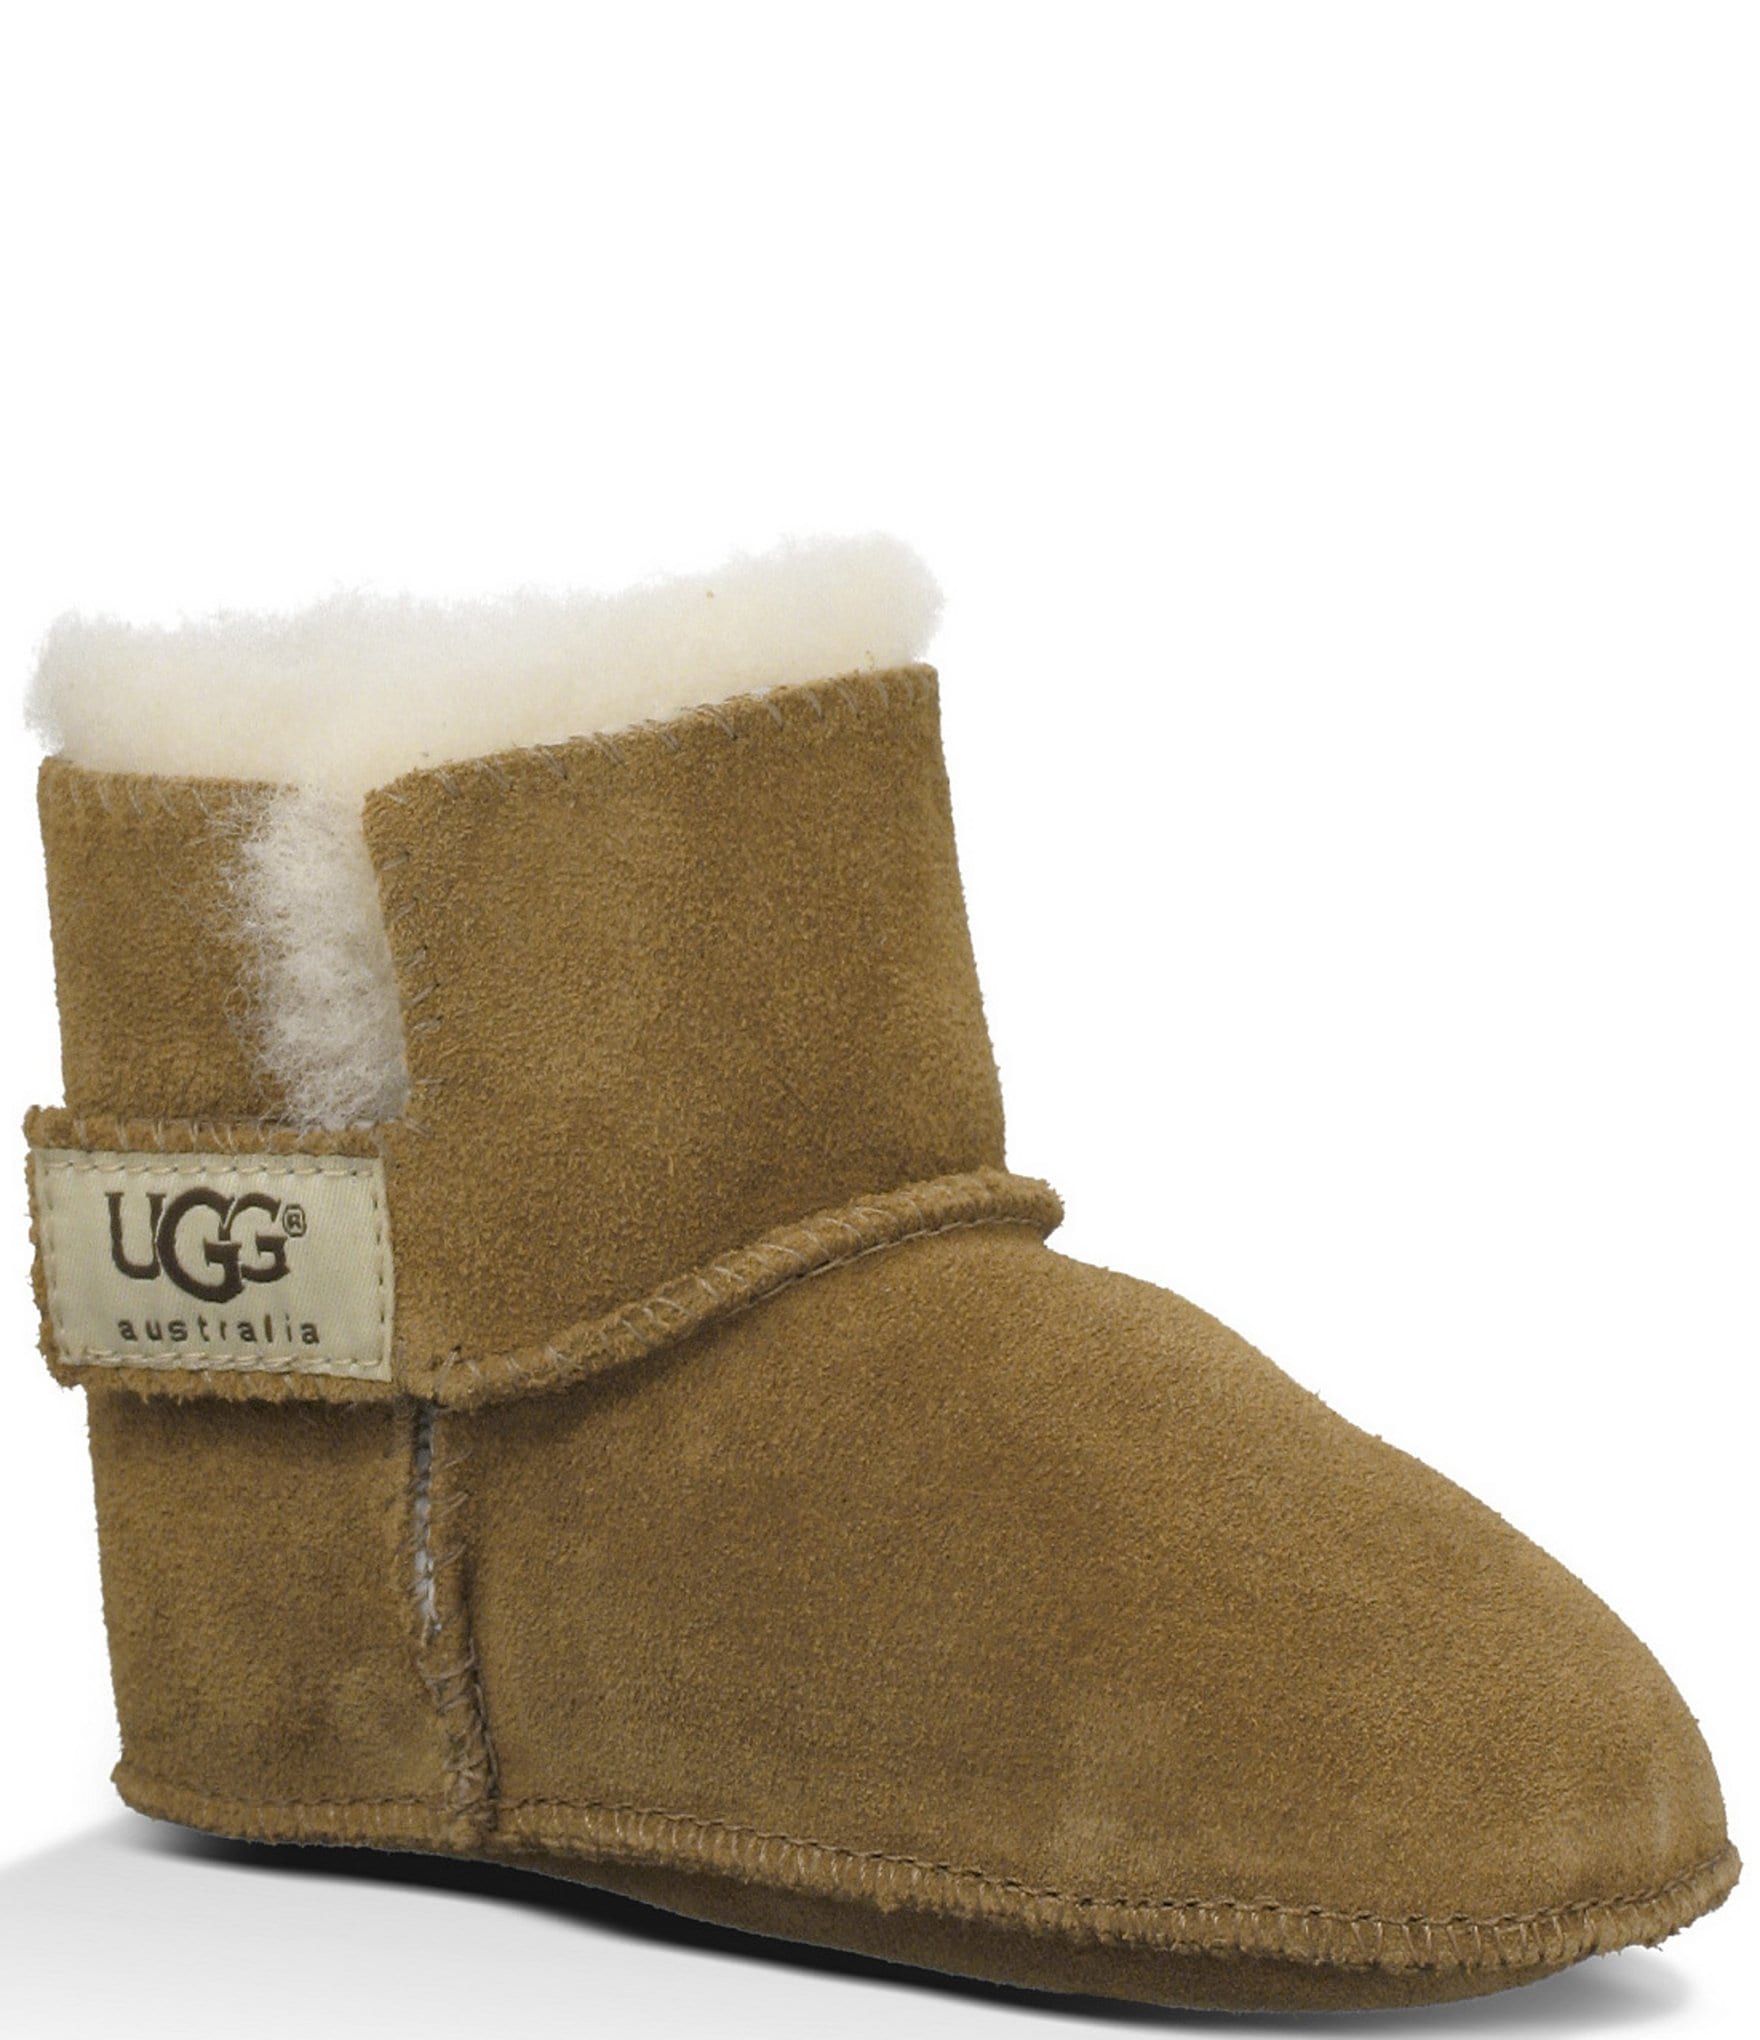 Ugg Infant Boots Size Chart